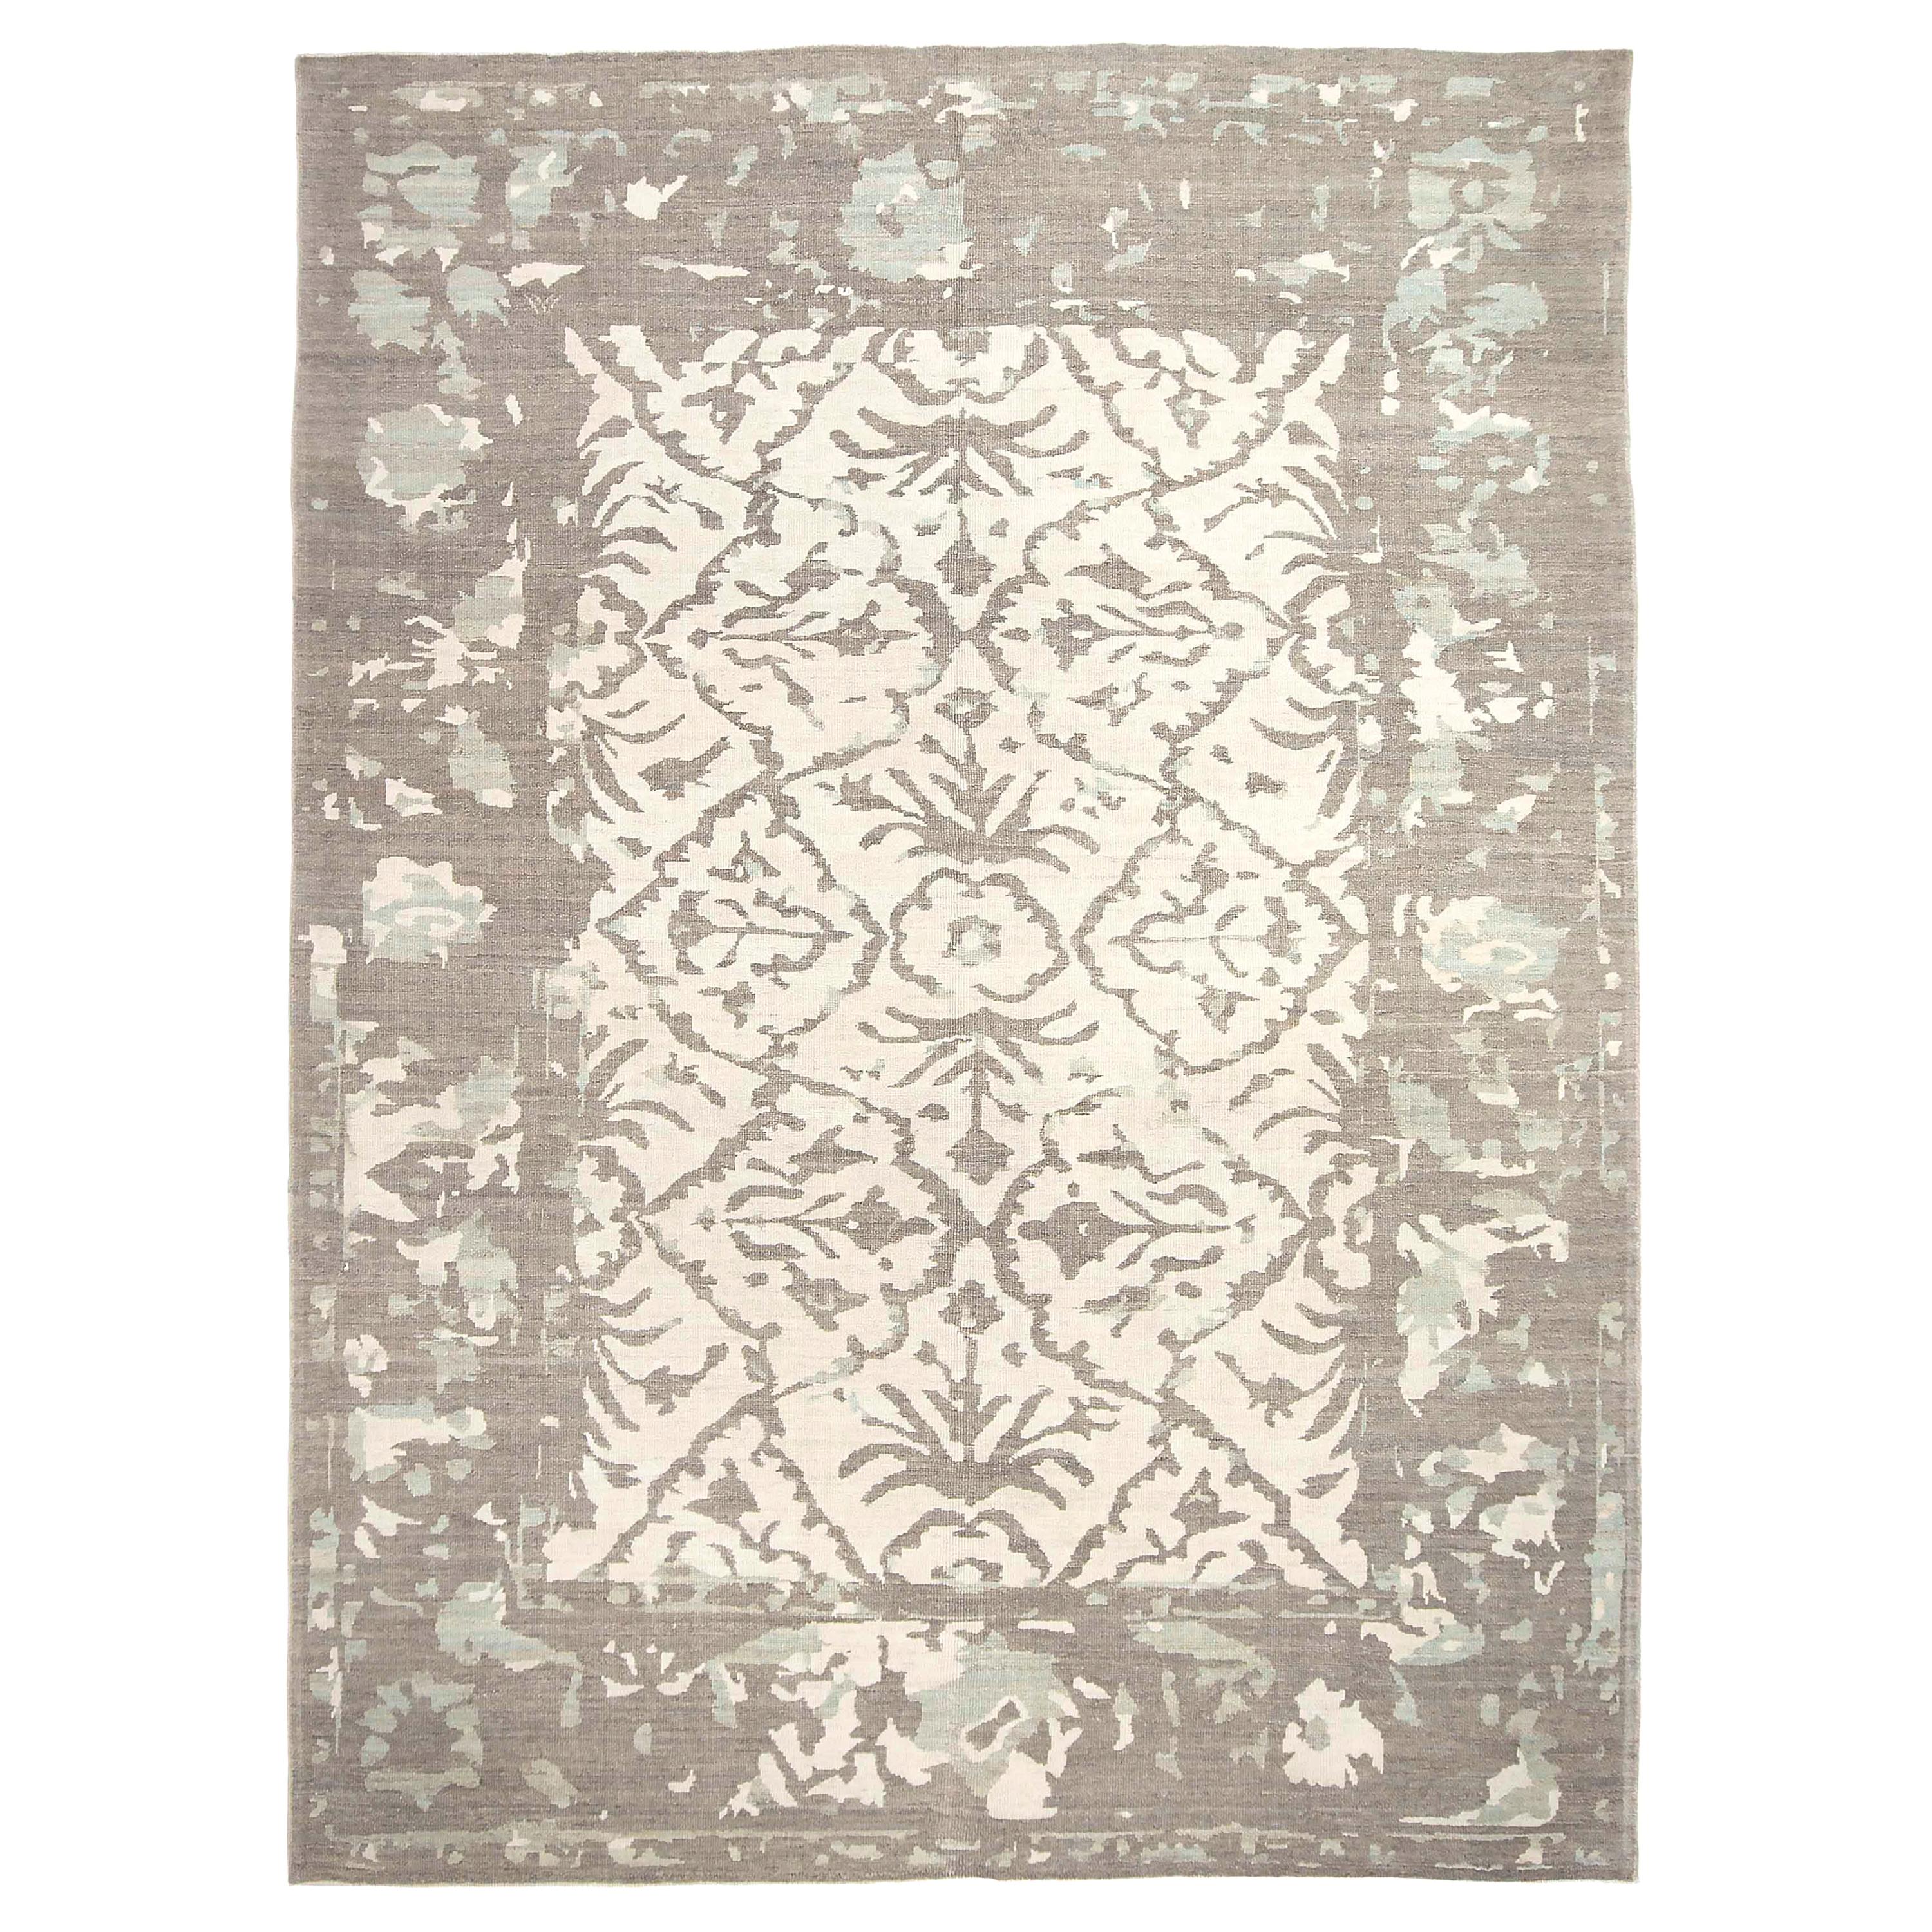 Contemporary Turkish Oushak Rug with Blue Floral Details on Brown & Beige Field For Sale